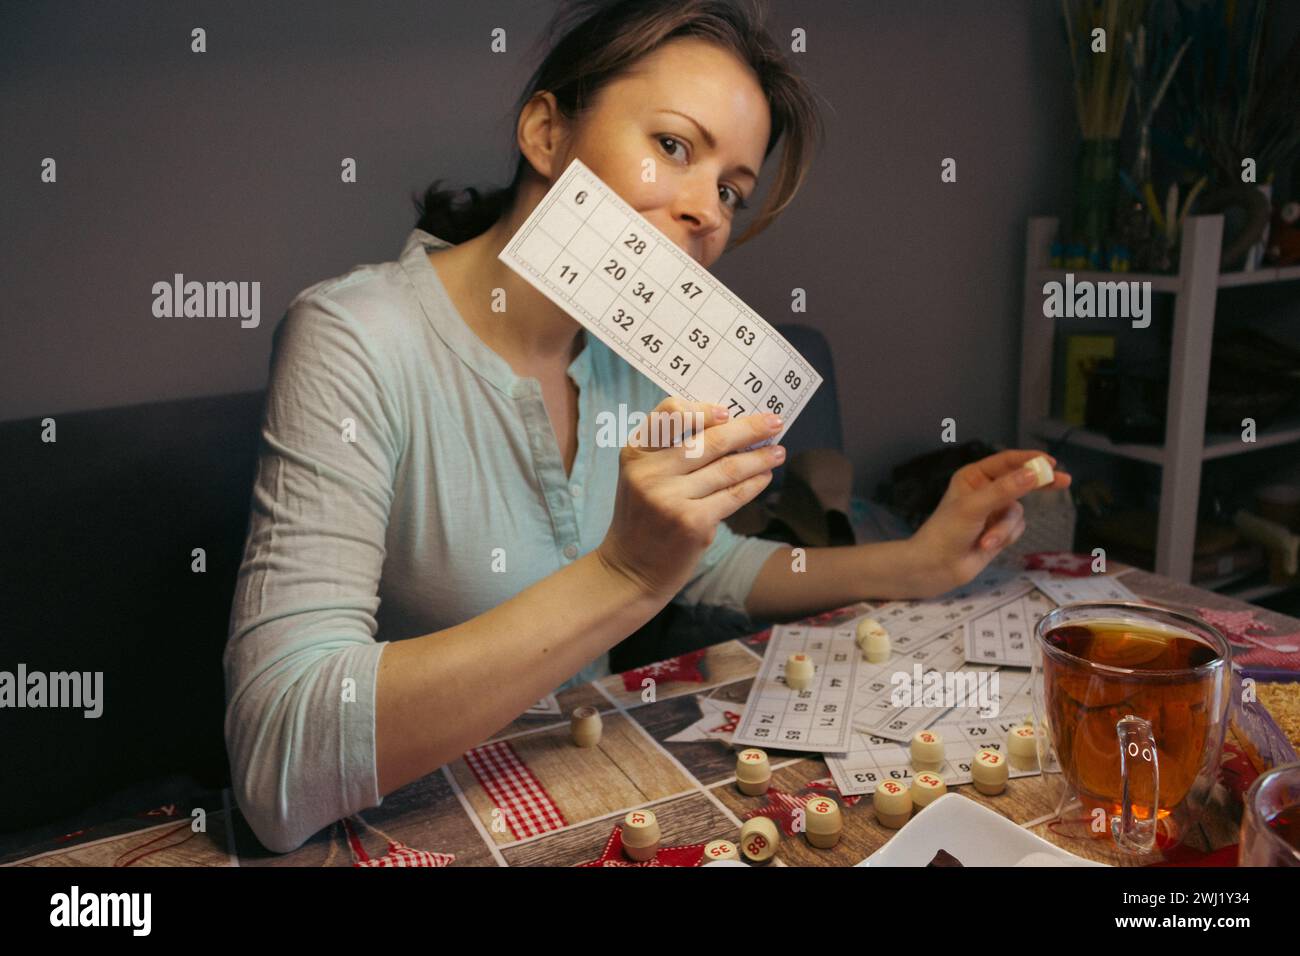 Girl playing in lotto. Nostalgia lifestyle. Woman playing bingo and holding card. Win concept. Leisure activity. Retro table games. Luck concept. Stock Photo